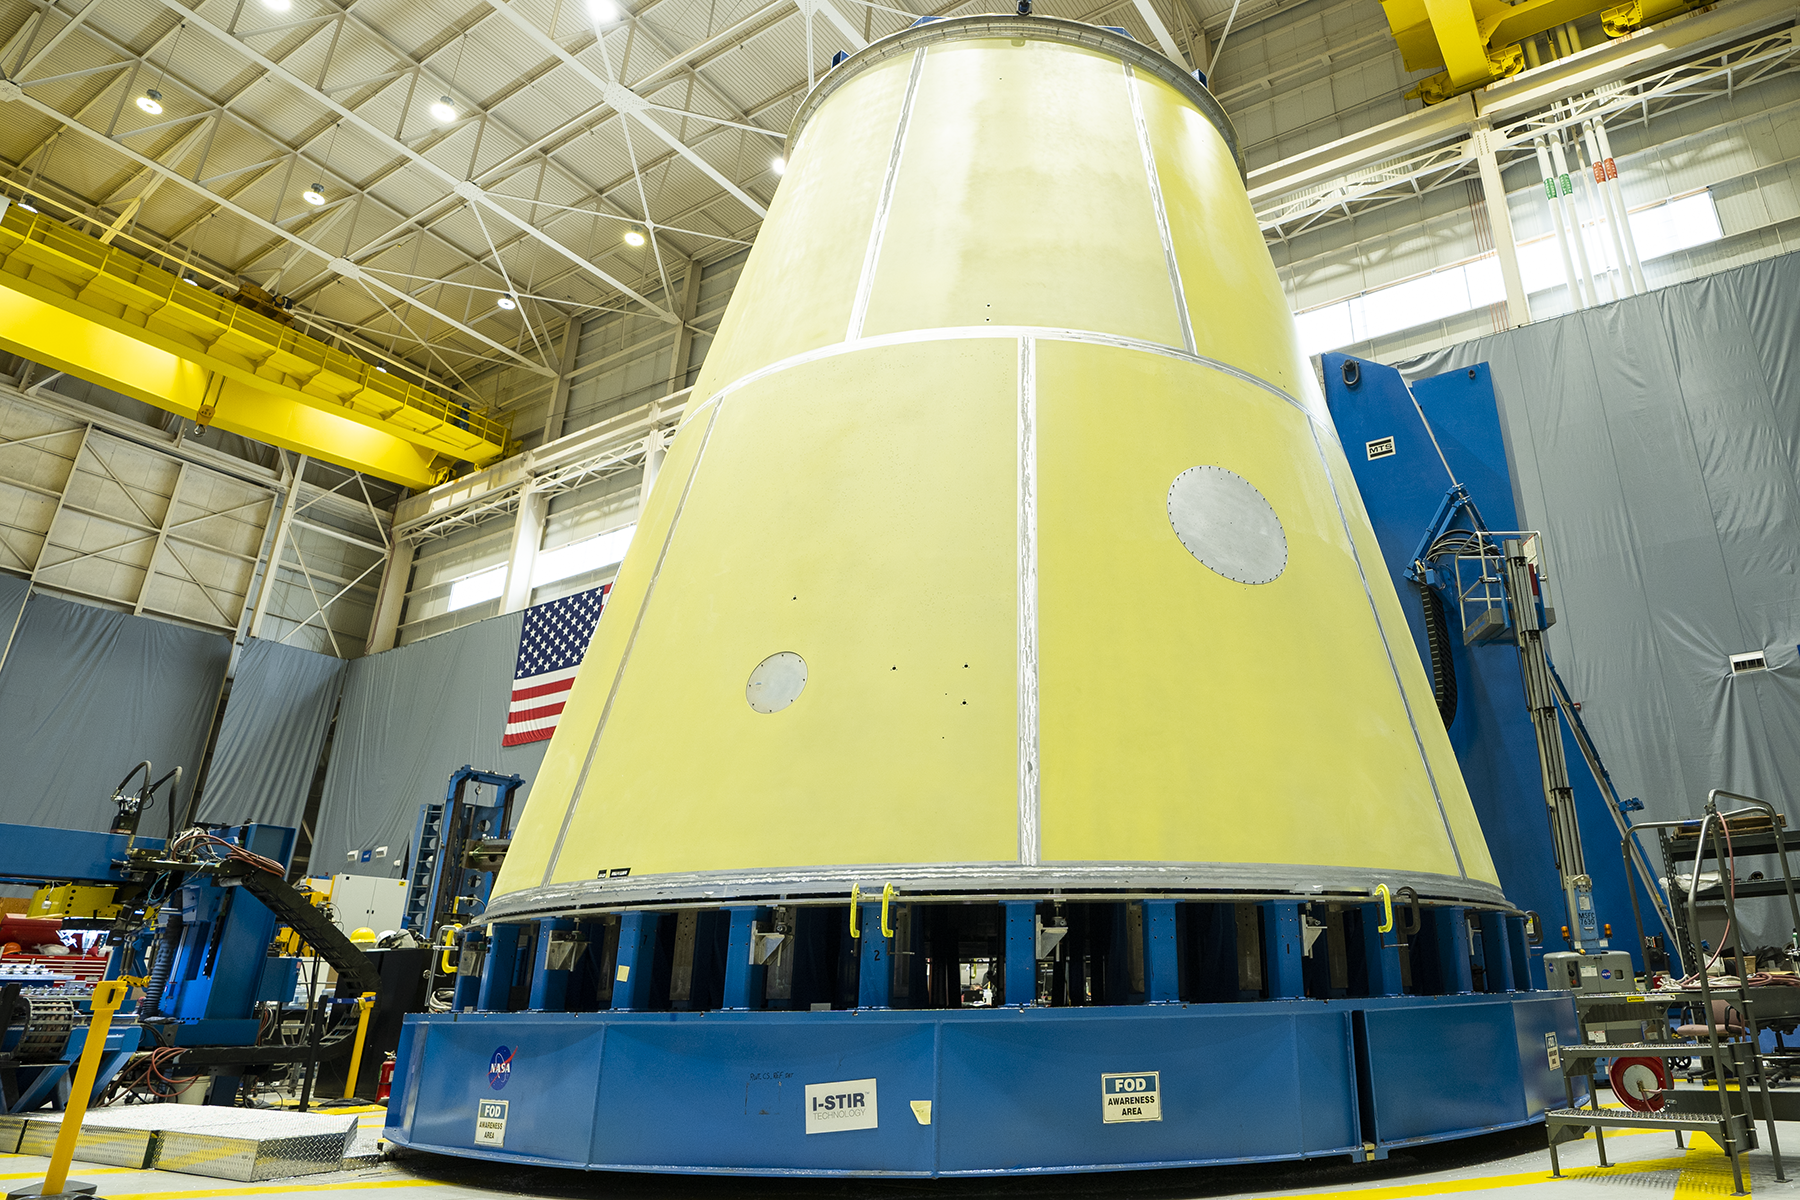 Technicians at NASA’s Marshall Space Flight Center in Huntsville, Alabama, complete the weld to join the two major parts of the launch vehicle stage adapter (LVSA) for NASA’s Space Launch System (SLS) rocket. The adapter,